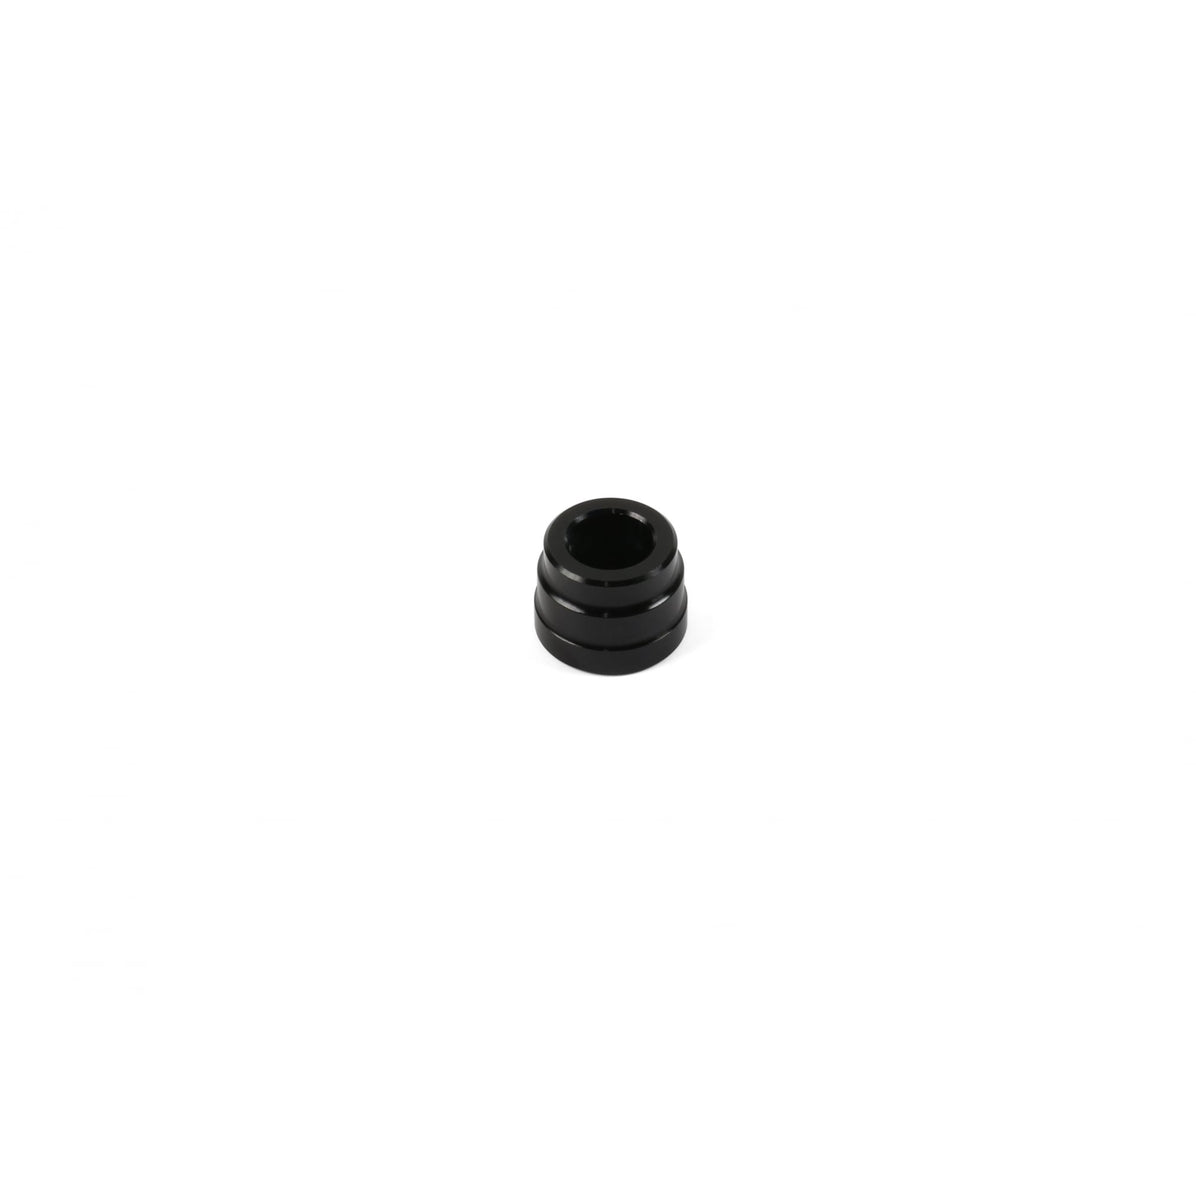 Hope Pro 4 12mm Non-Drive Side Spacer - Black